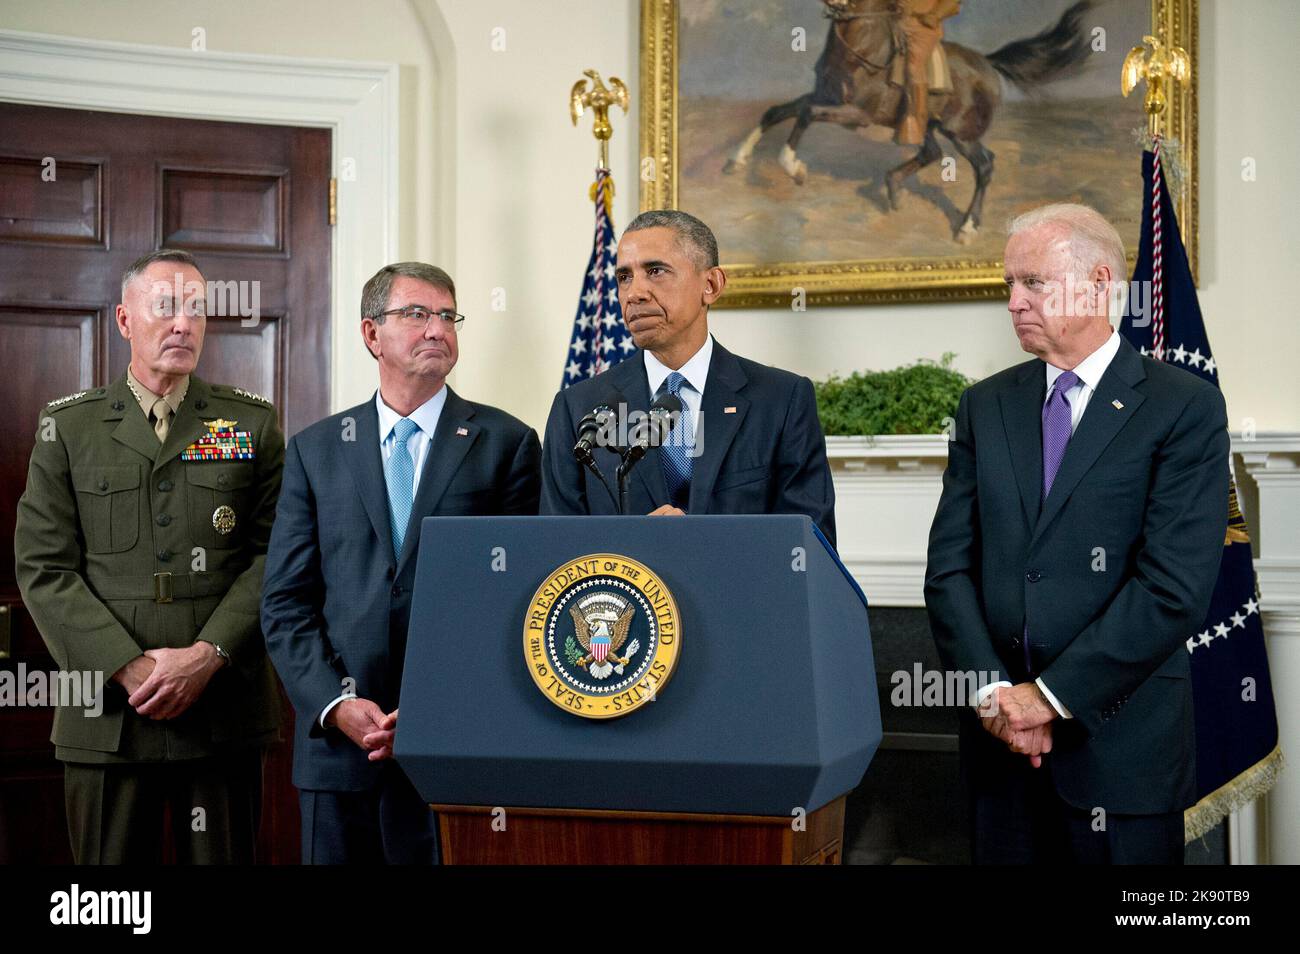 United States President Barack Obama announces he will keep 5,500 US troops in Afghanistan when he leaves office in 2017 and explains his reasoning for that action in the Roosevelt Room of the White House in Washington, DC on Thursday, October 15, 2015. From left to right: US Marine Corps General Joseph F. Dunford, Chairman, Joint Chiefs of Staff; US Secretary of Defense Ashton Carter; the President, and US Vice President Joe Biden. Credit: Ron Sachs/Pool via CNP Stock Photo